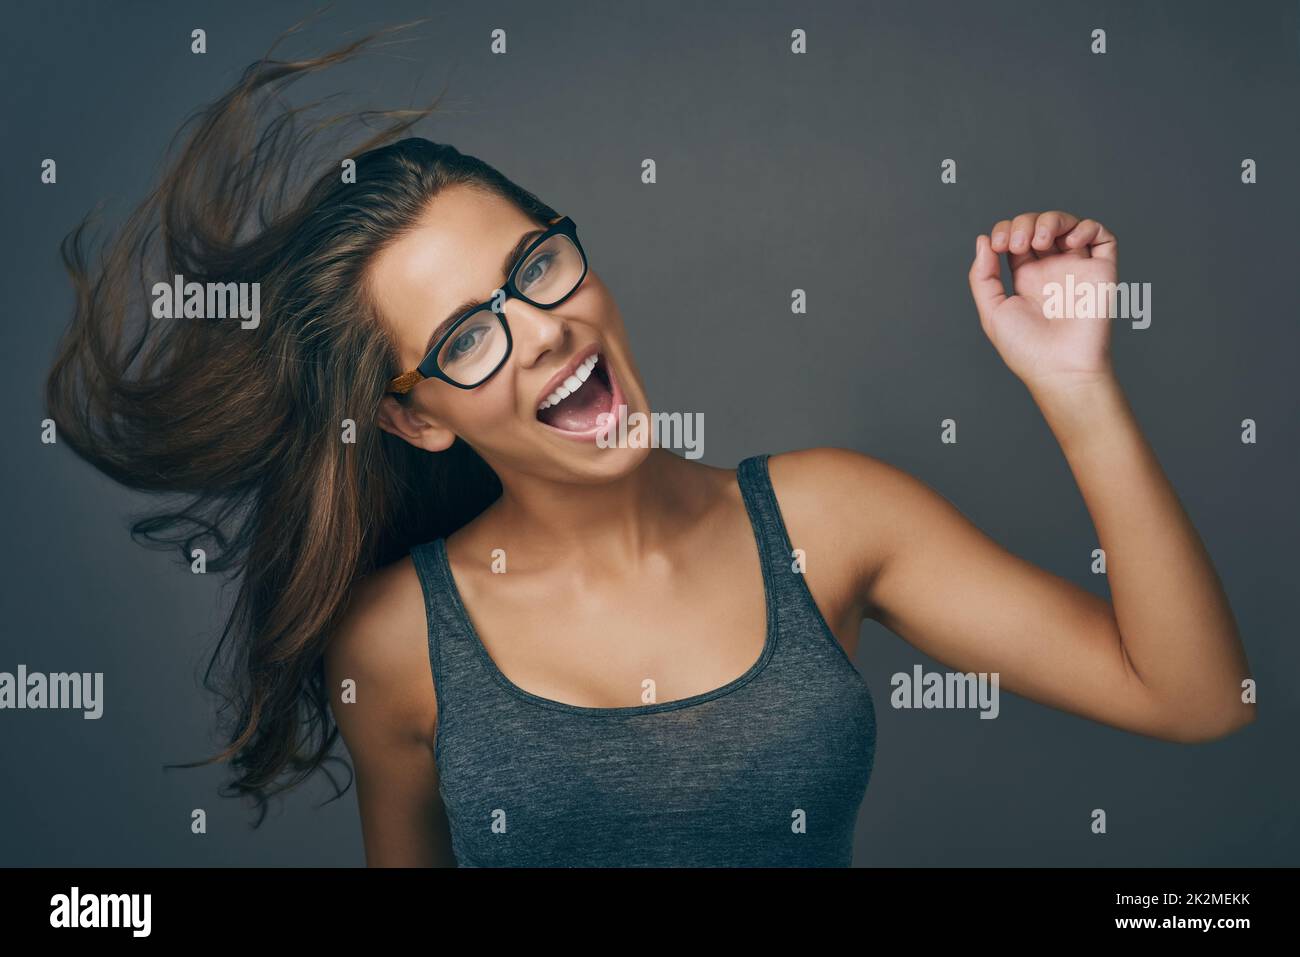 https://c8.alamy.com/comp/2K2MEKK/let-go-and-be-who-you-are-studio-shot-of-an-attractive-young-woman-wearing-glasses-2K2MEKK.jpg